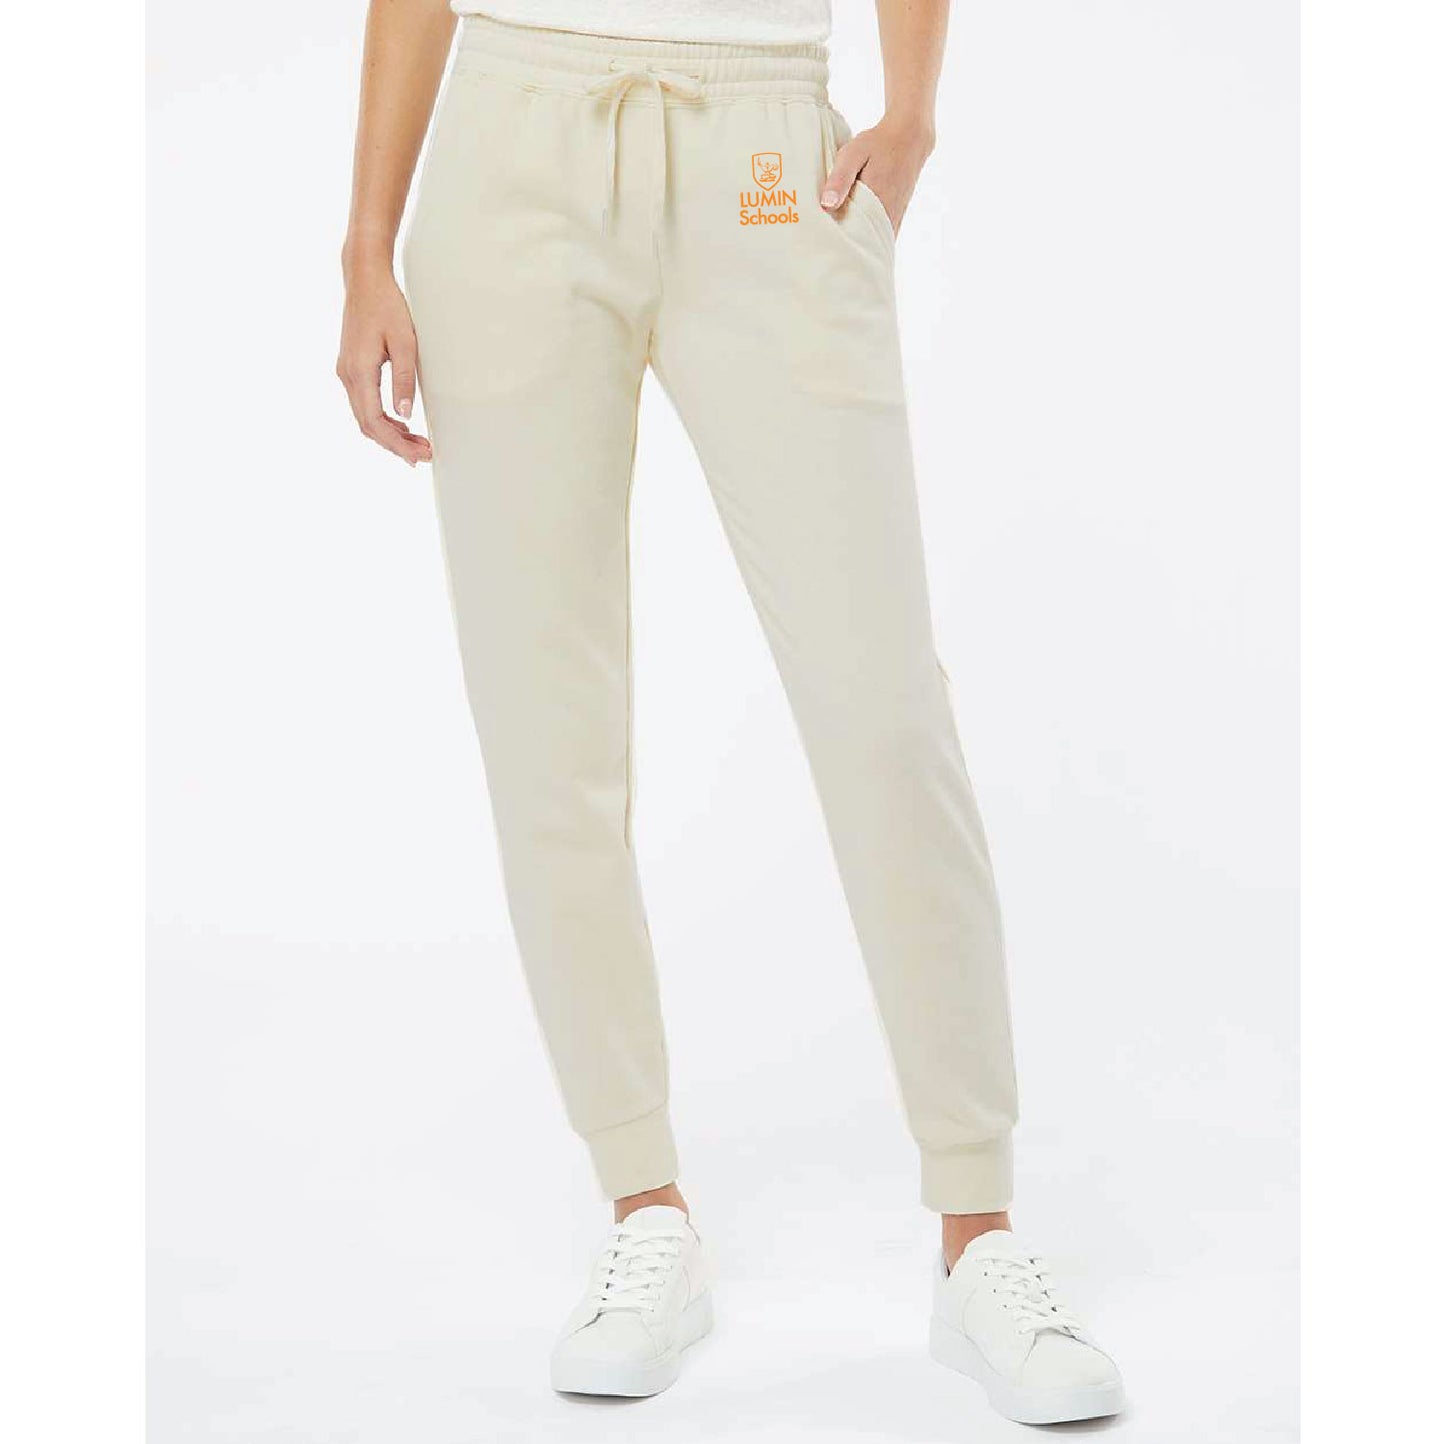 Independent Trading Co. Women's California Wave Wash Sweatpants - STAFF